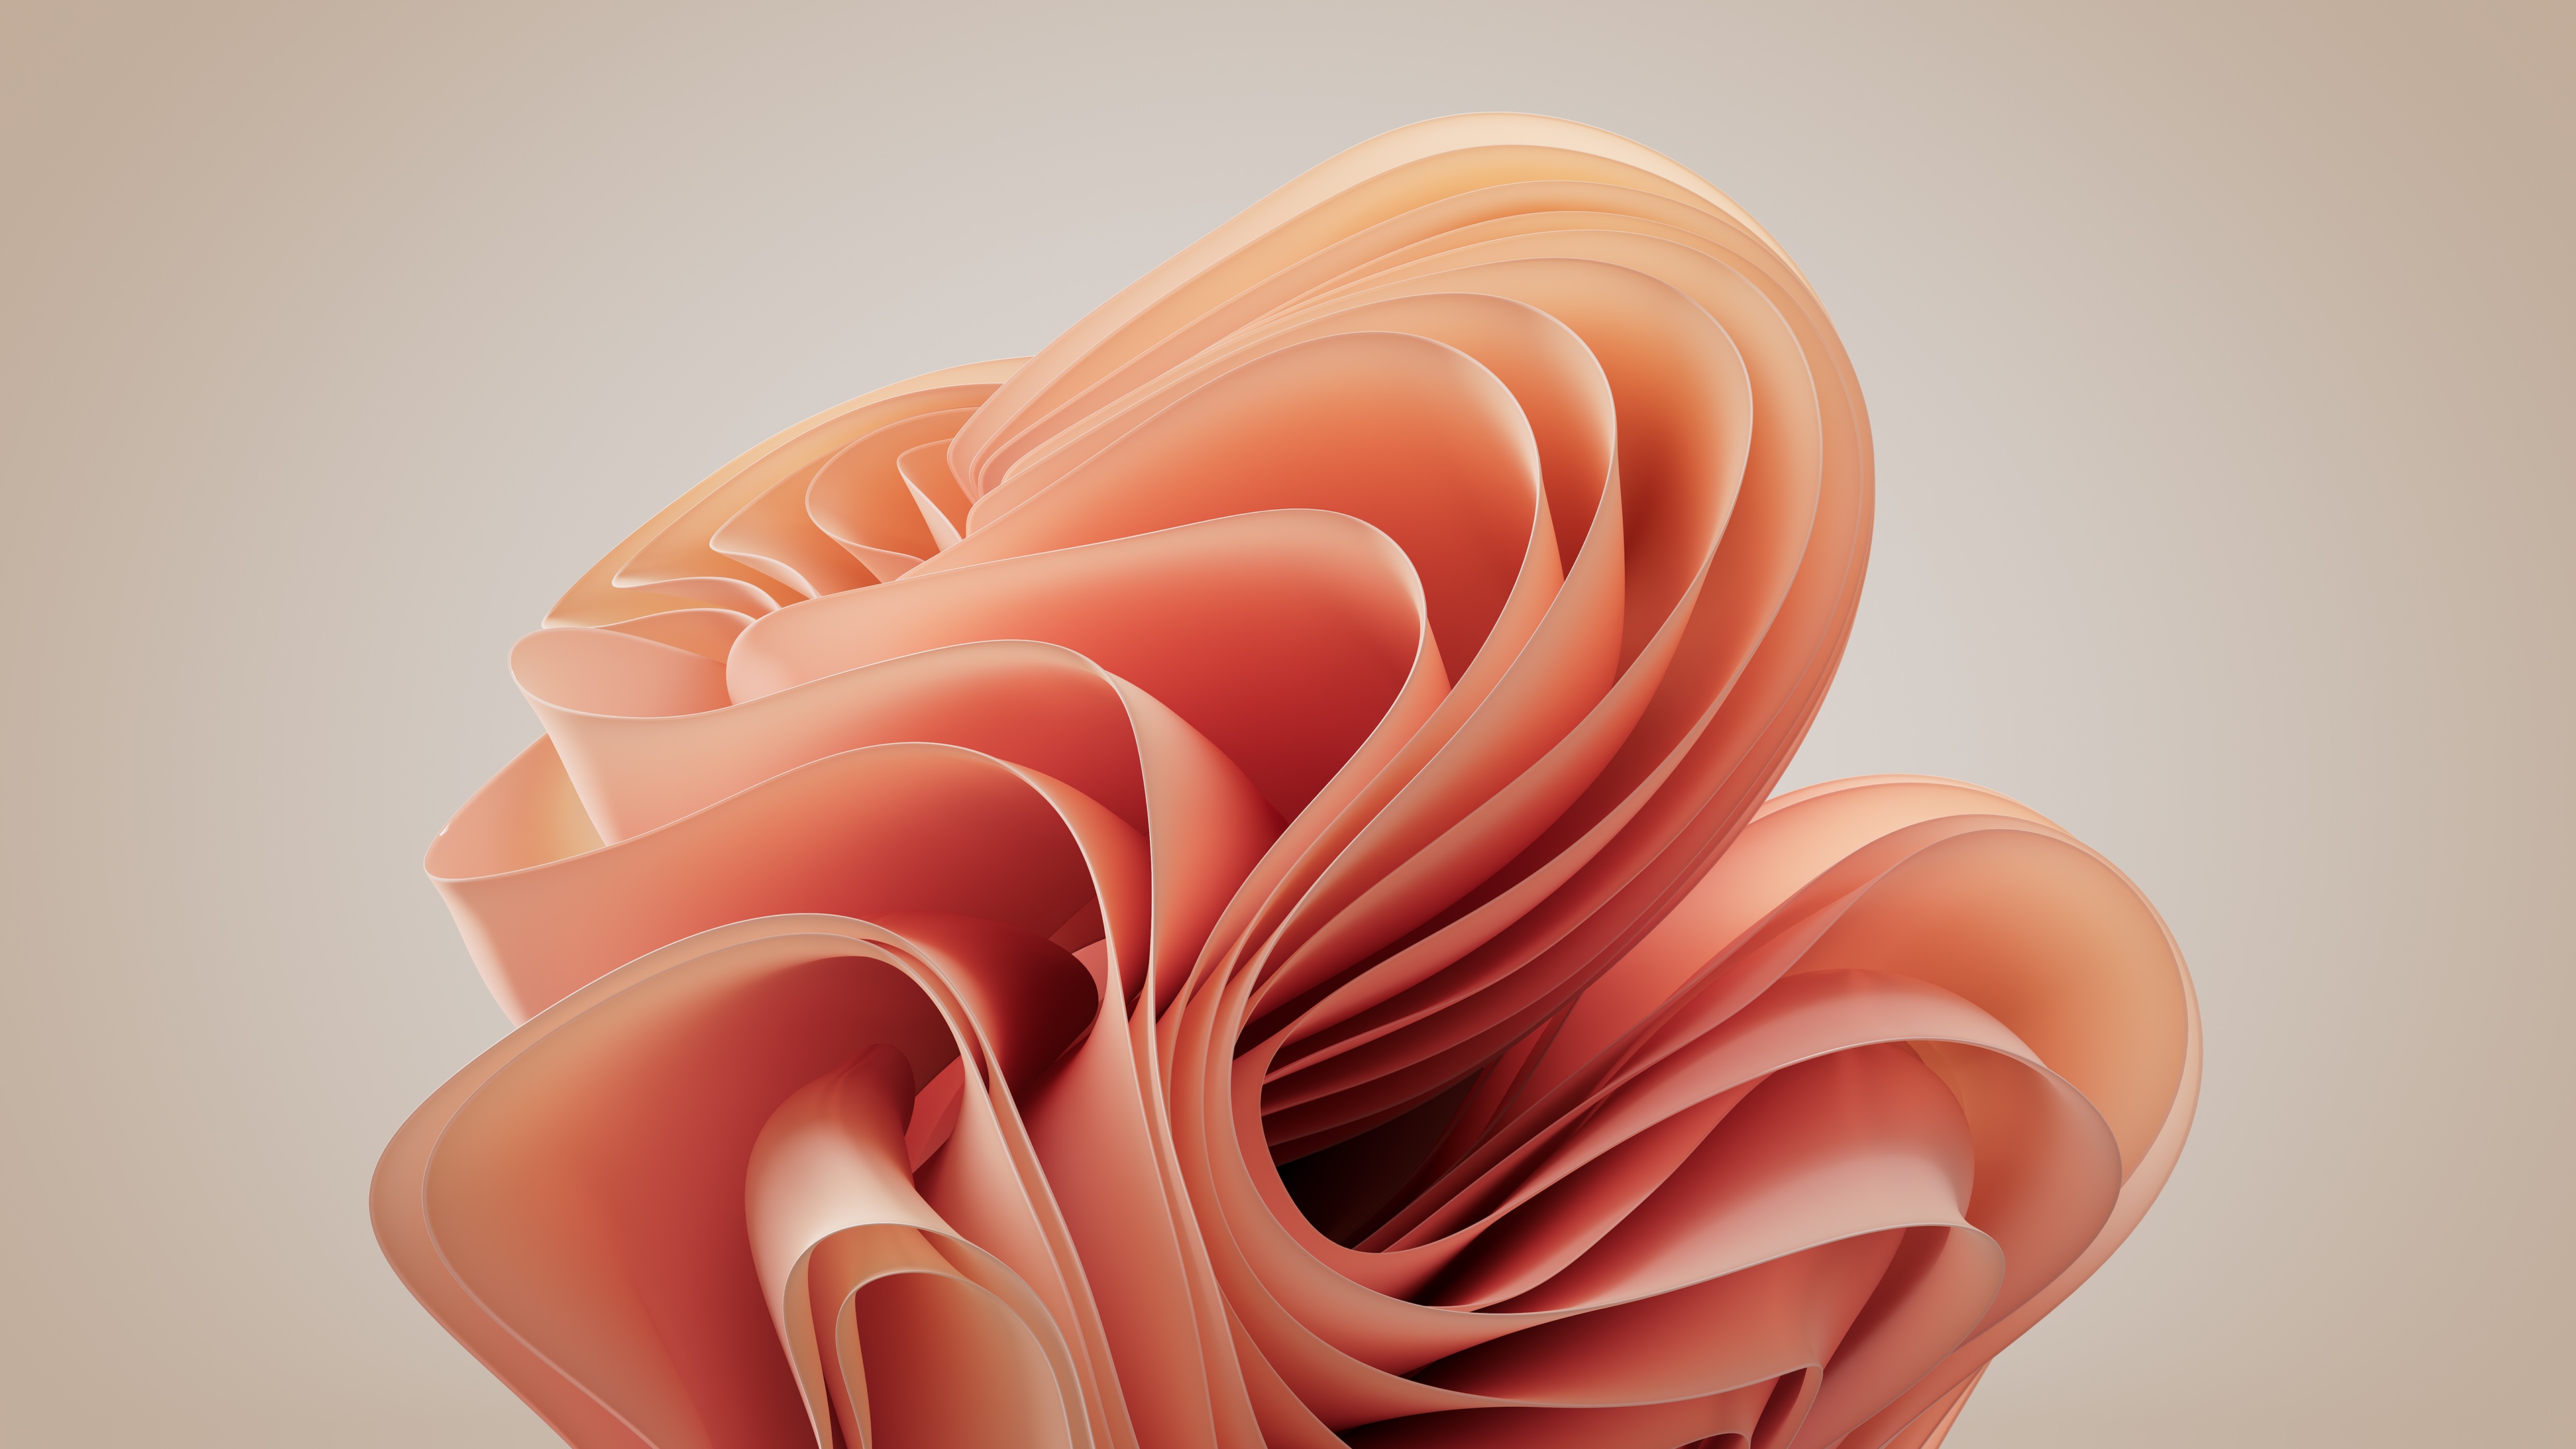 2932x2932 Orange 3d Abstract 4k Ipad Pro Retina Display HD 4k Wallpapers,  Images, Backgrounds, Photos and Pictures